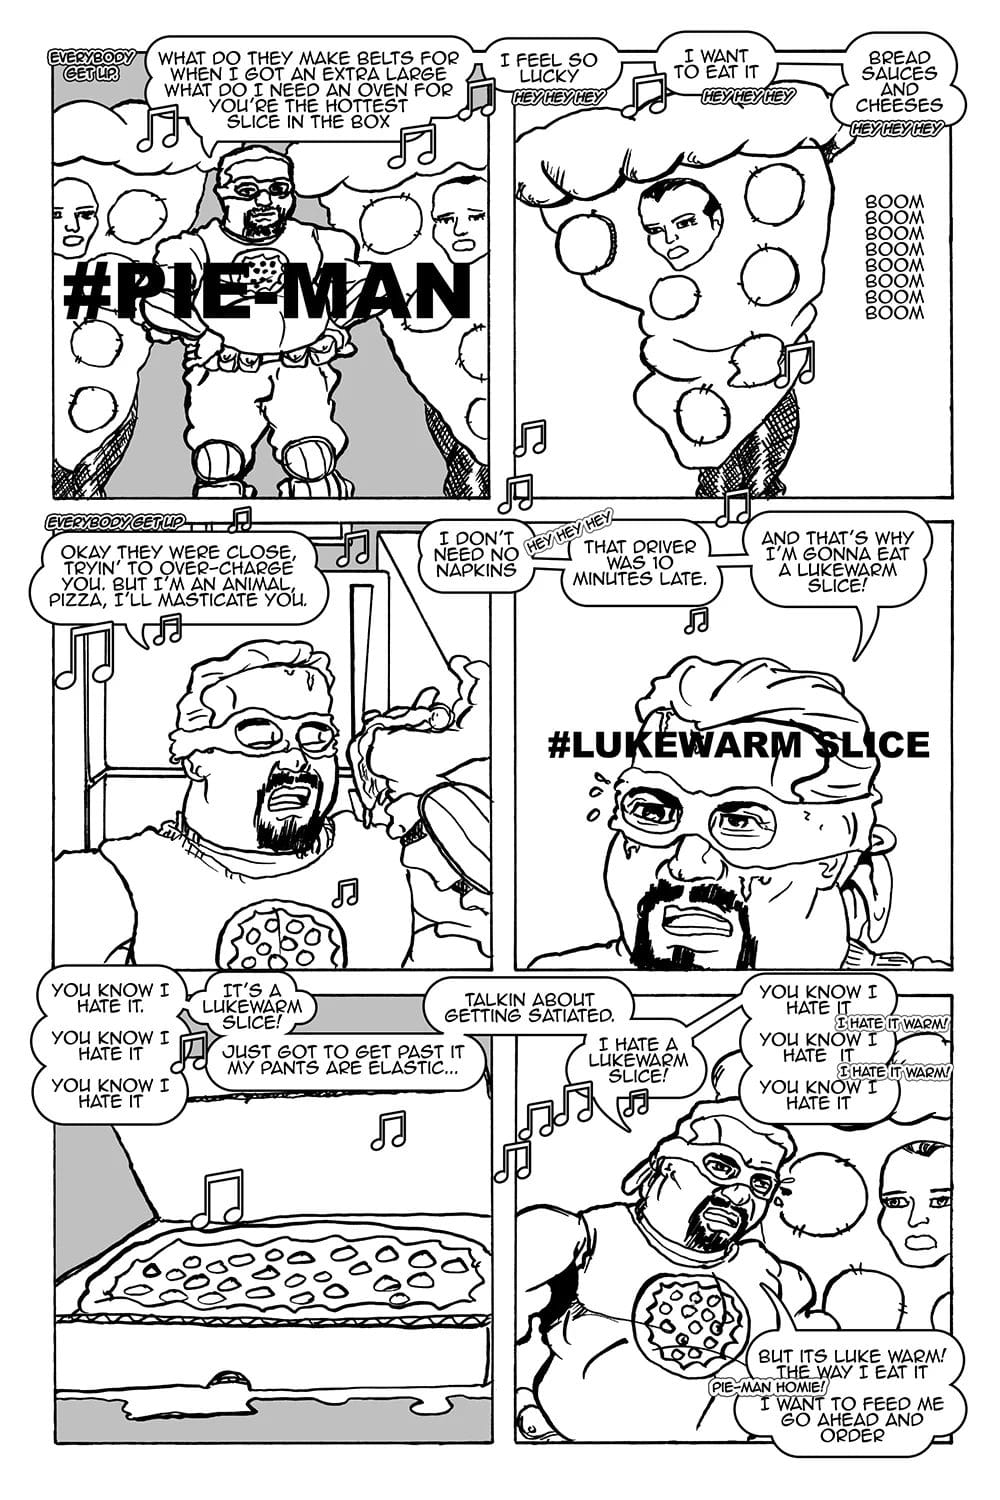 Pie-Man sings about his favorite food… Pizza.